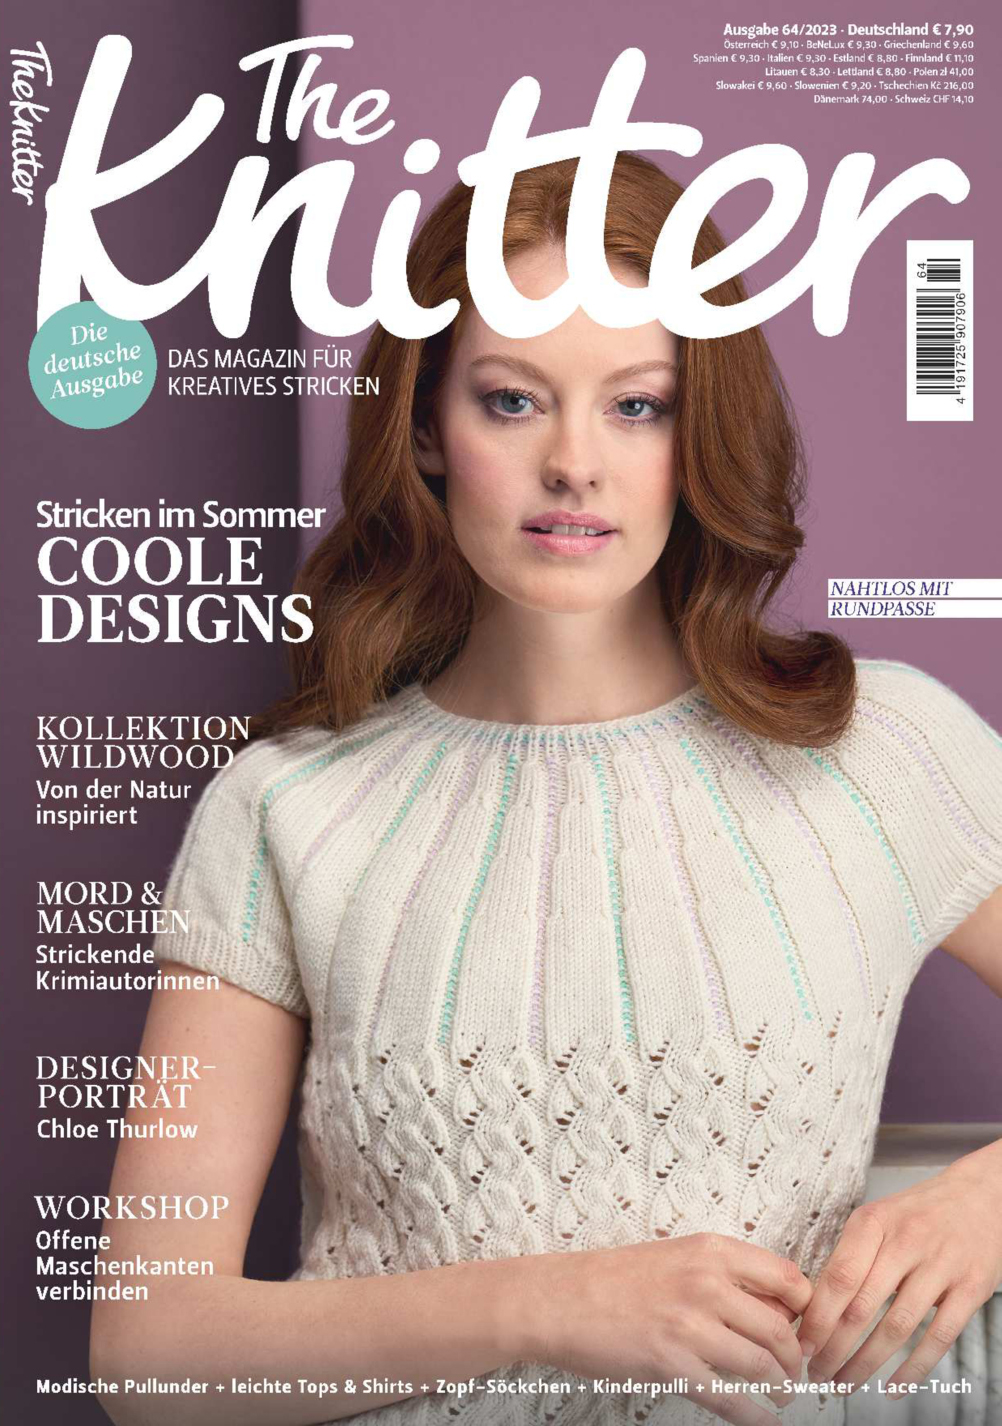 E-Paper: The Knitter 64/2023 - Coole Designs